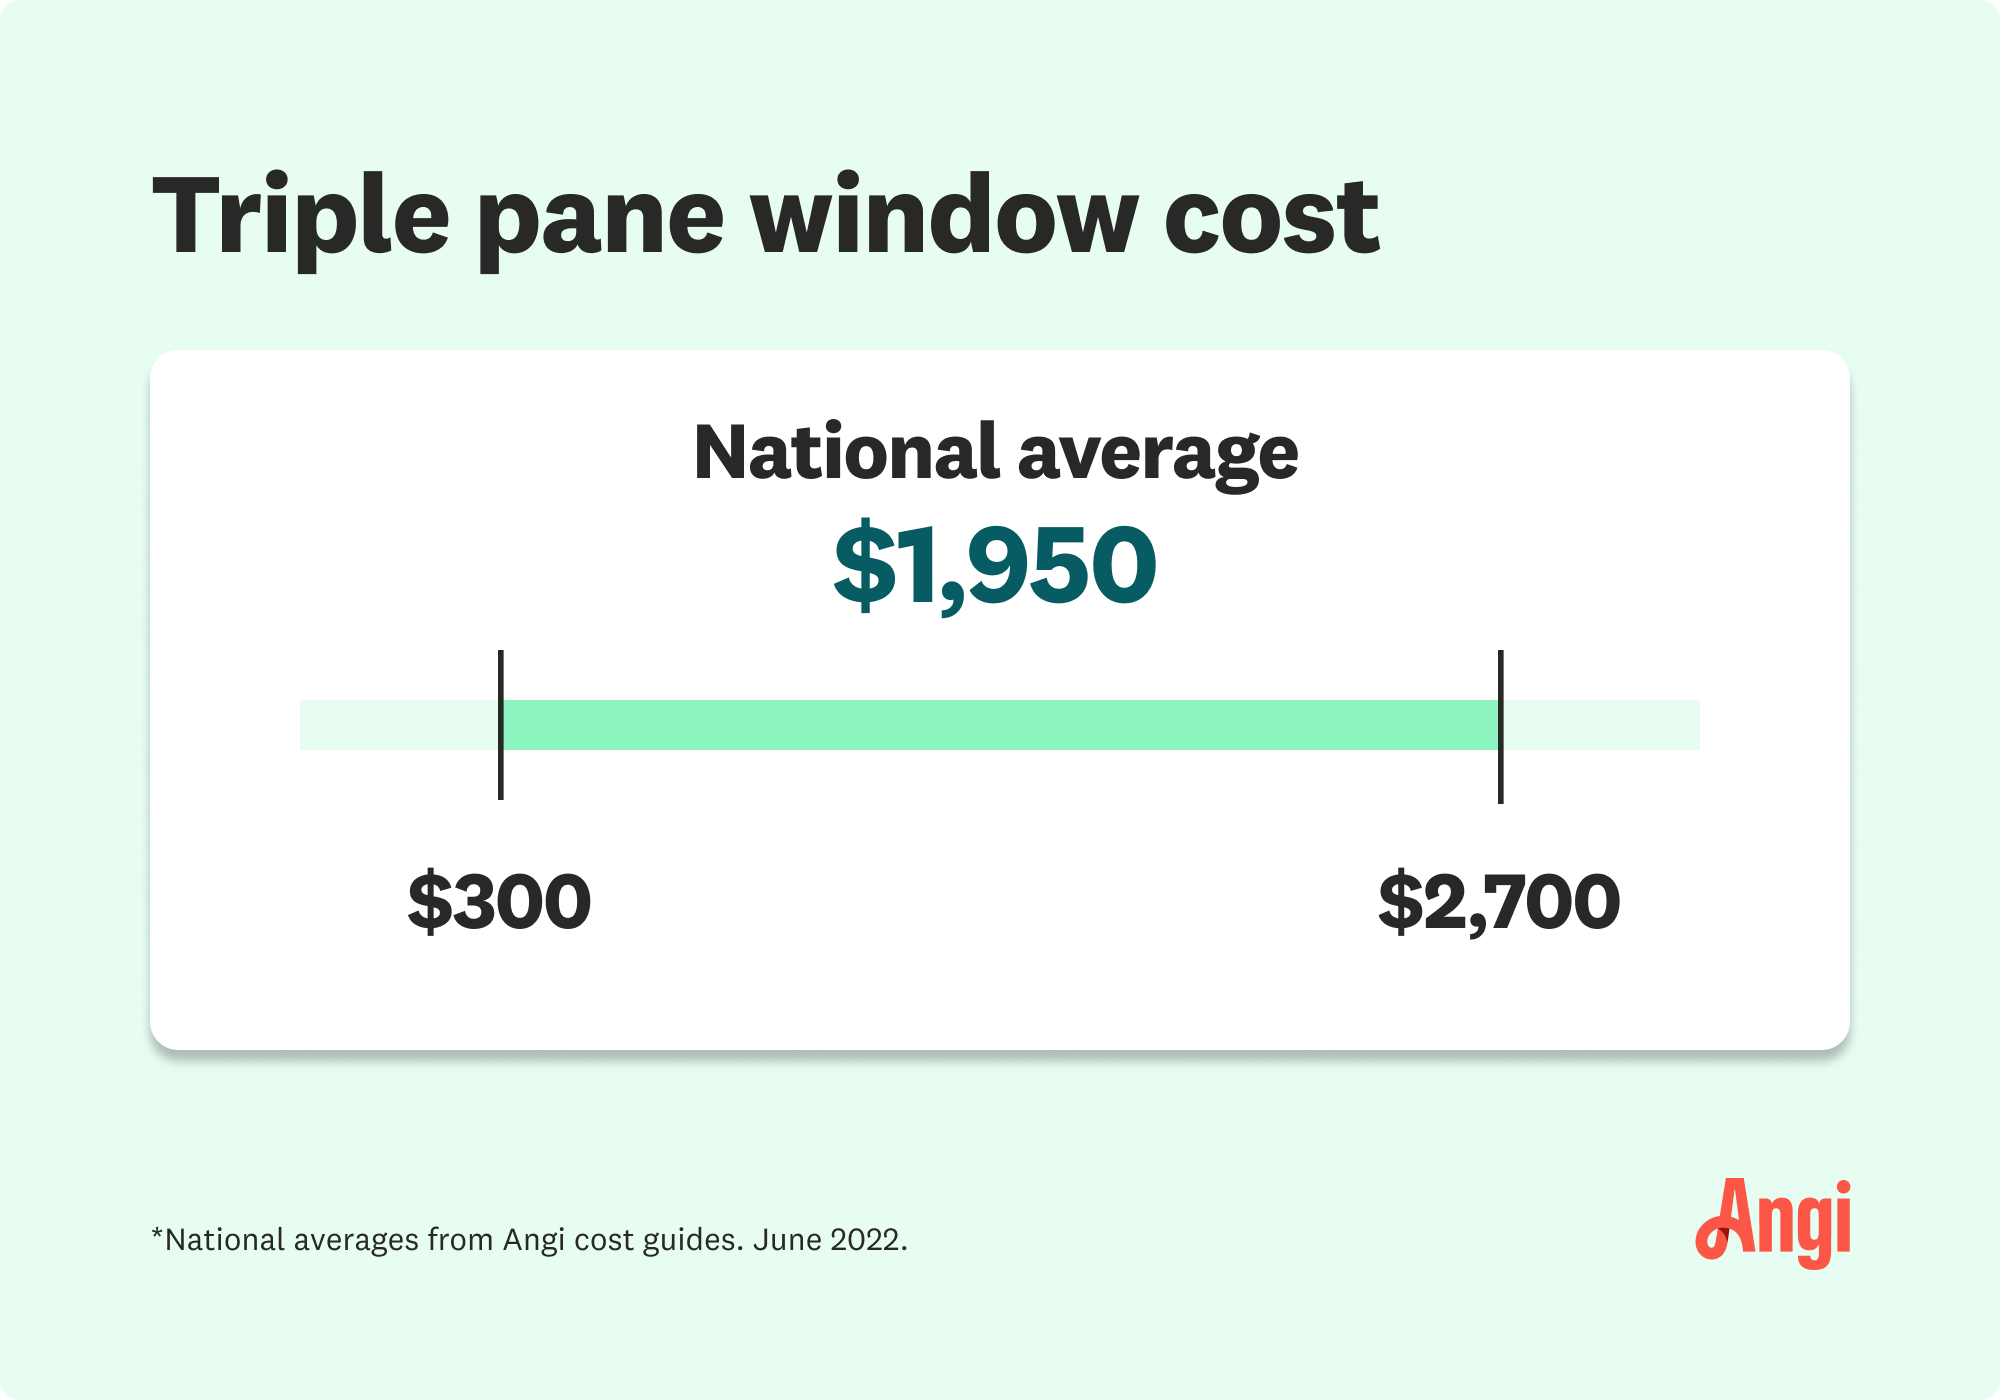 Average cost for triple pane windows is $1,950, ranging from $300 to $2,700